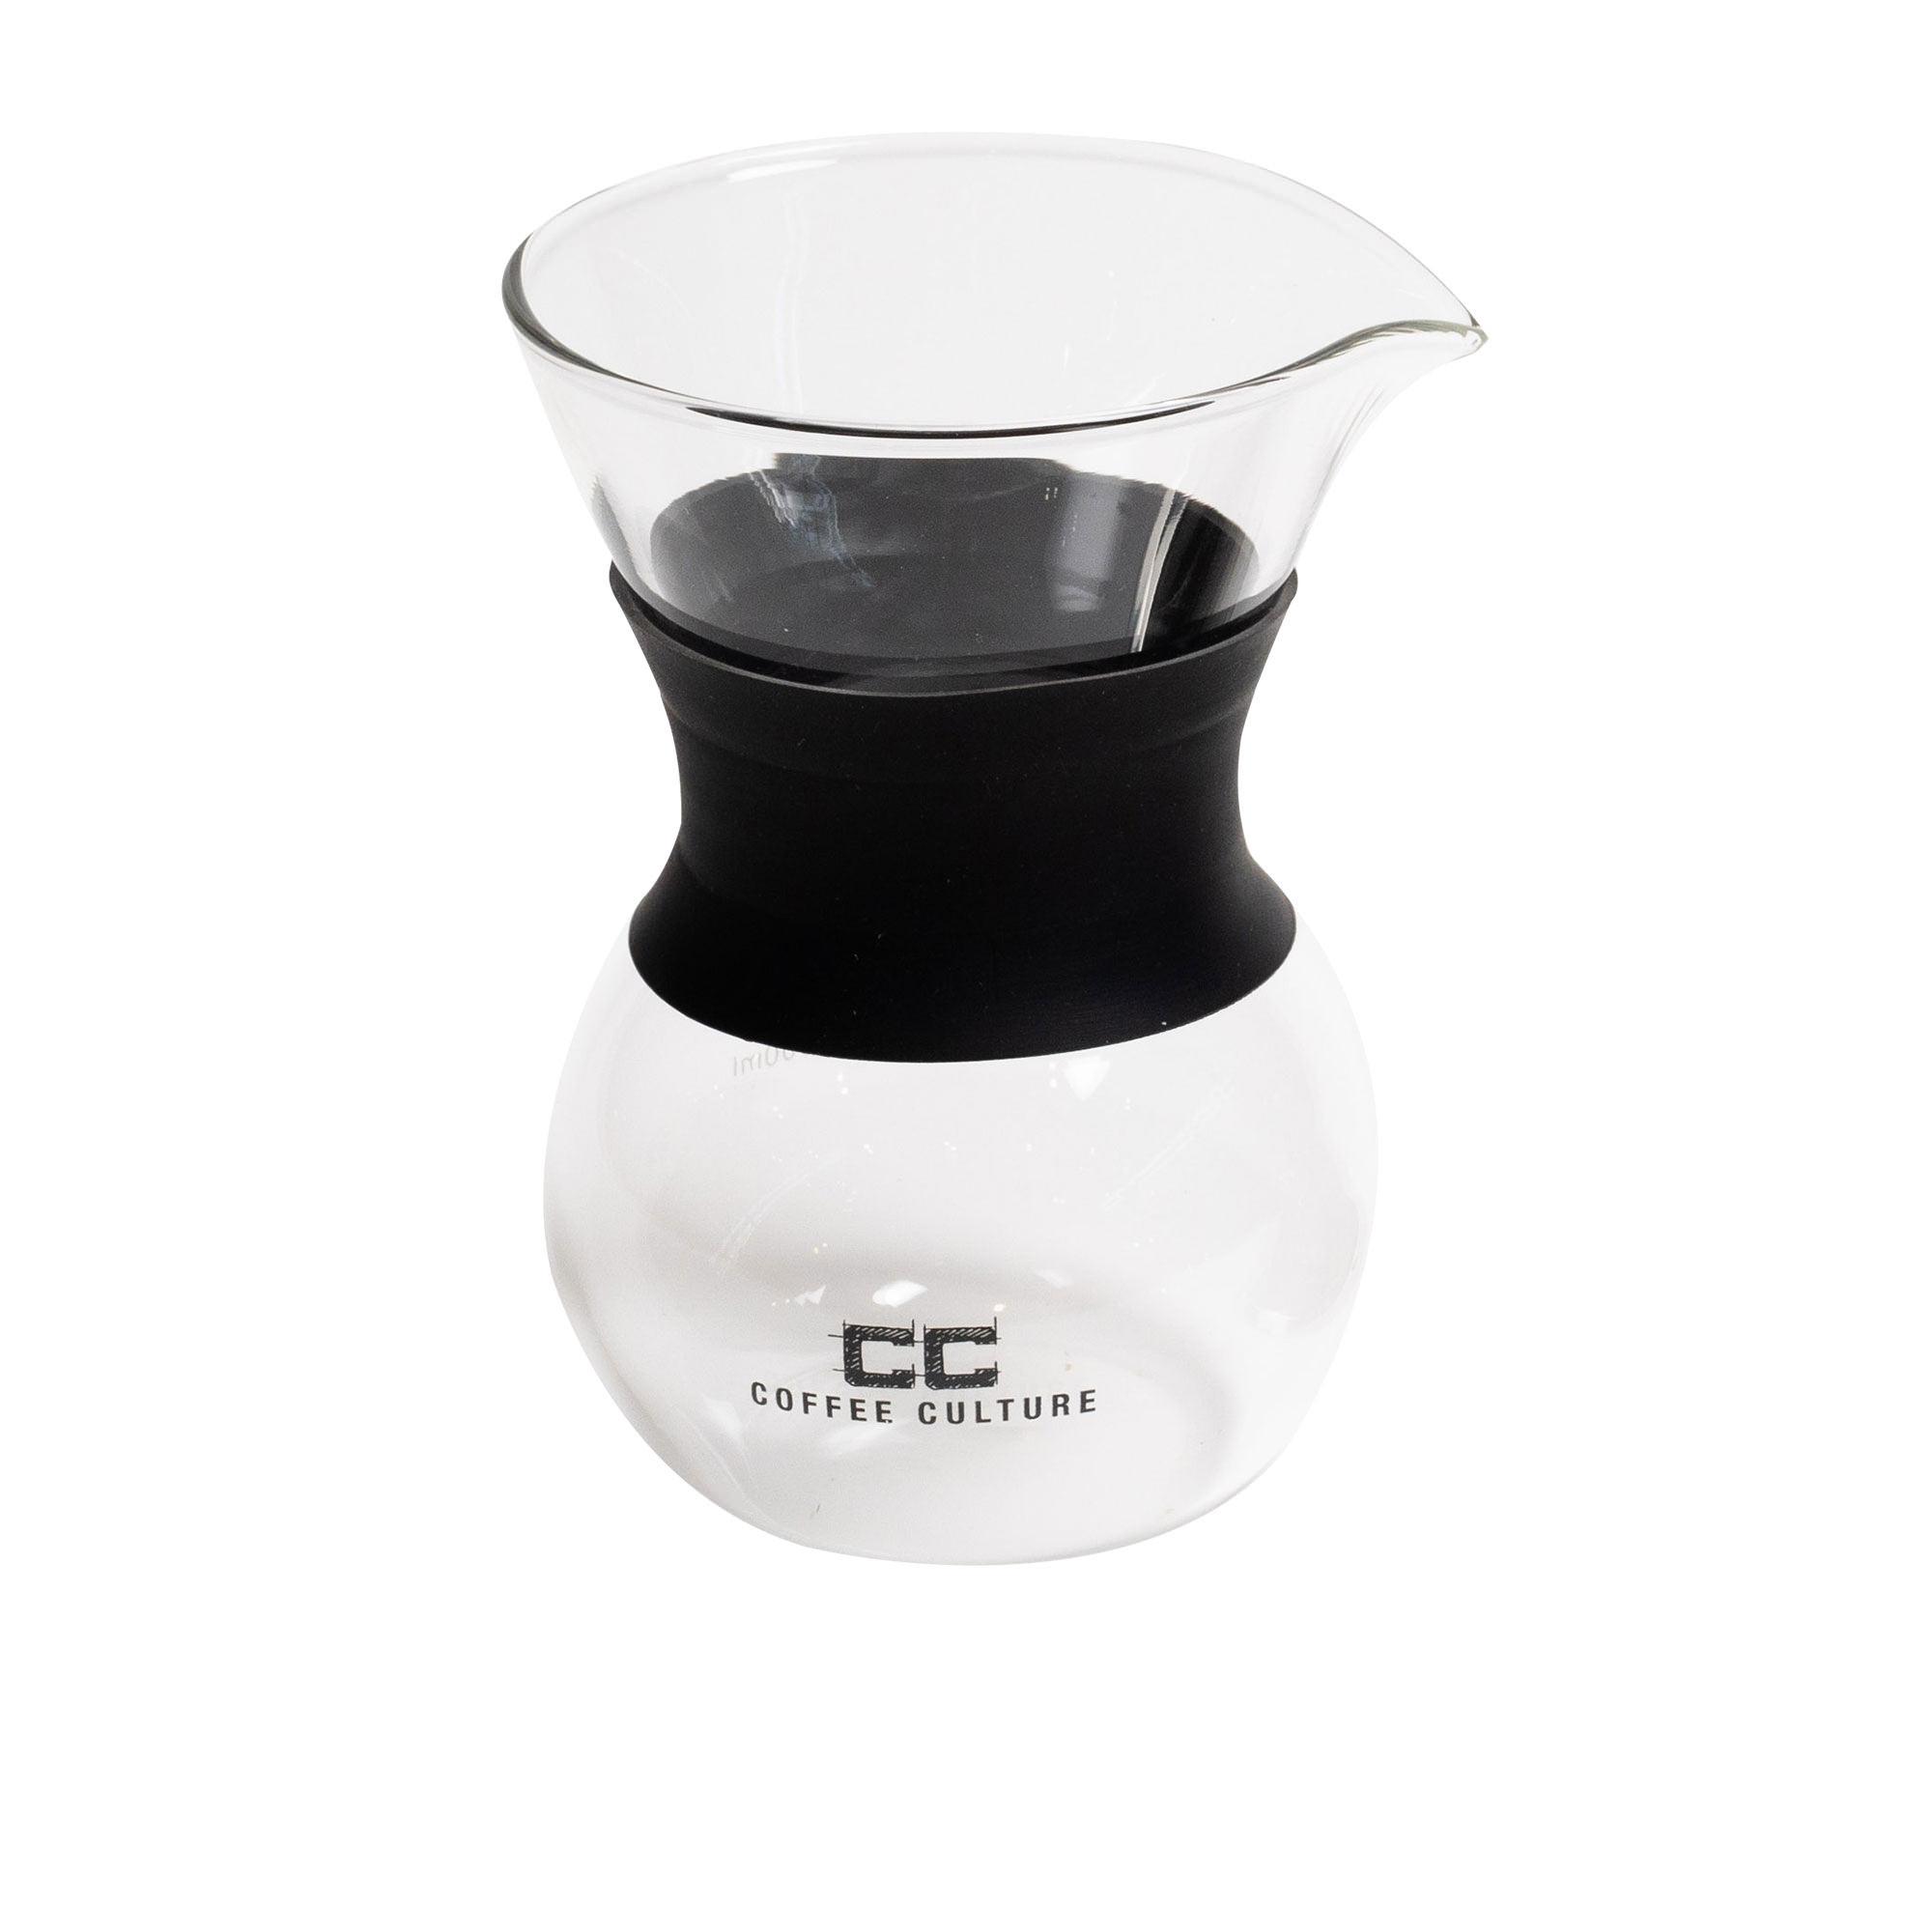 Coffee Culture Pour Over Coffee Maker 400ml Image 2